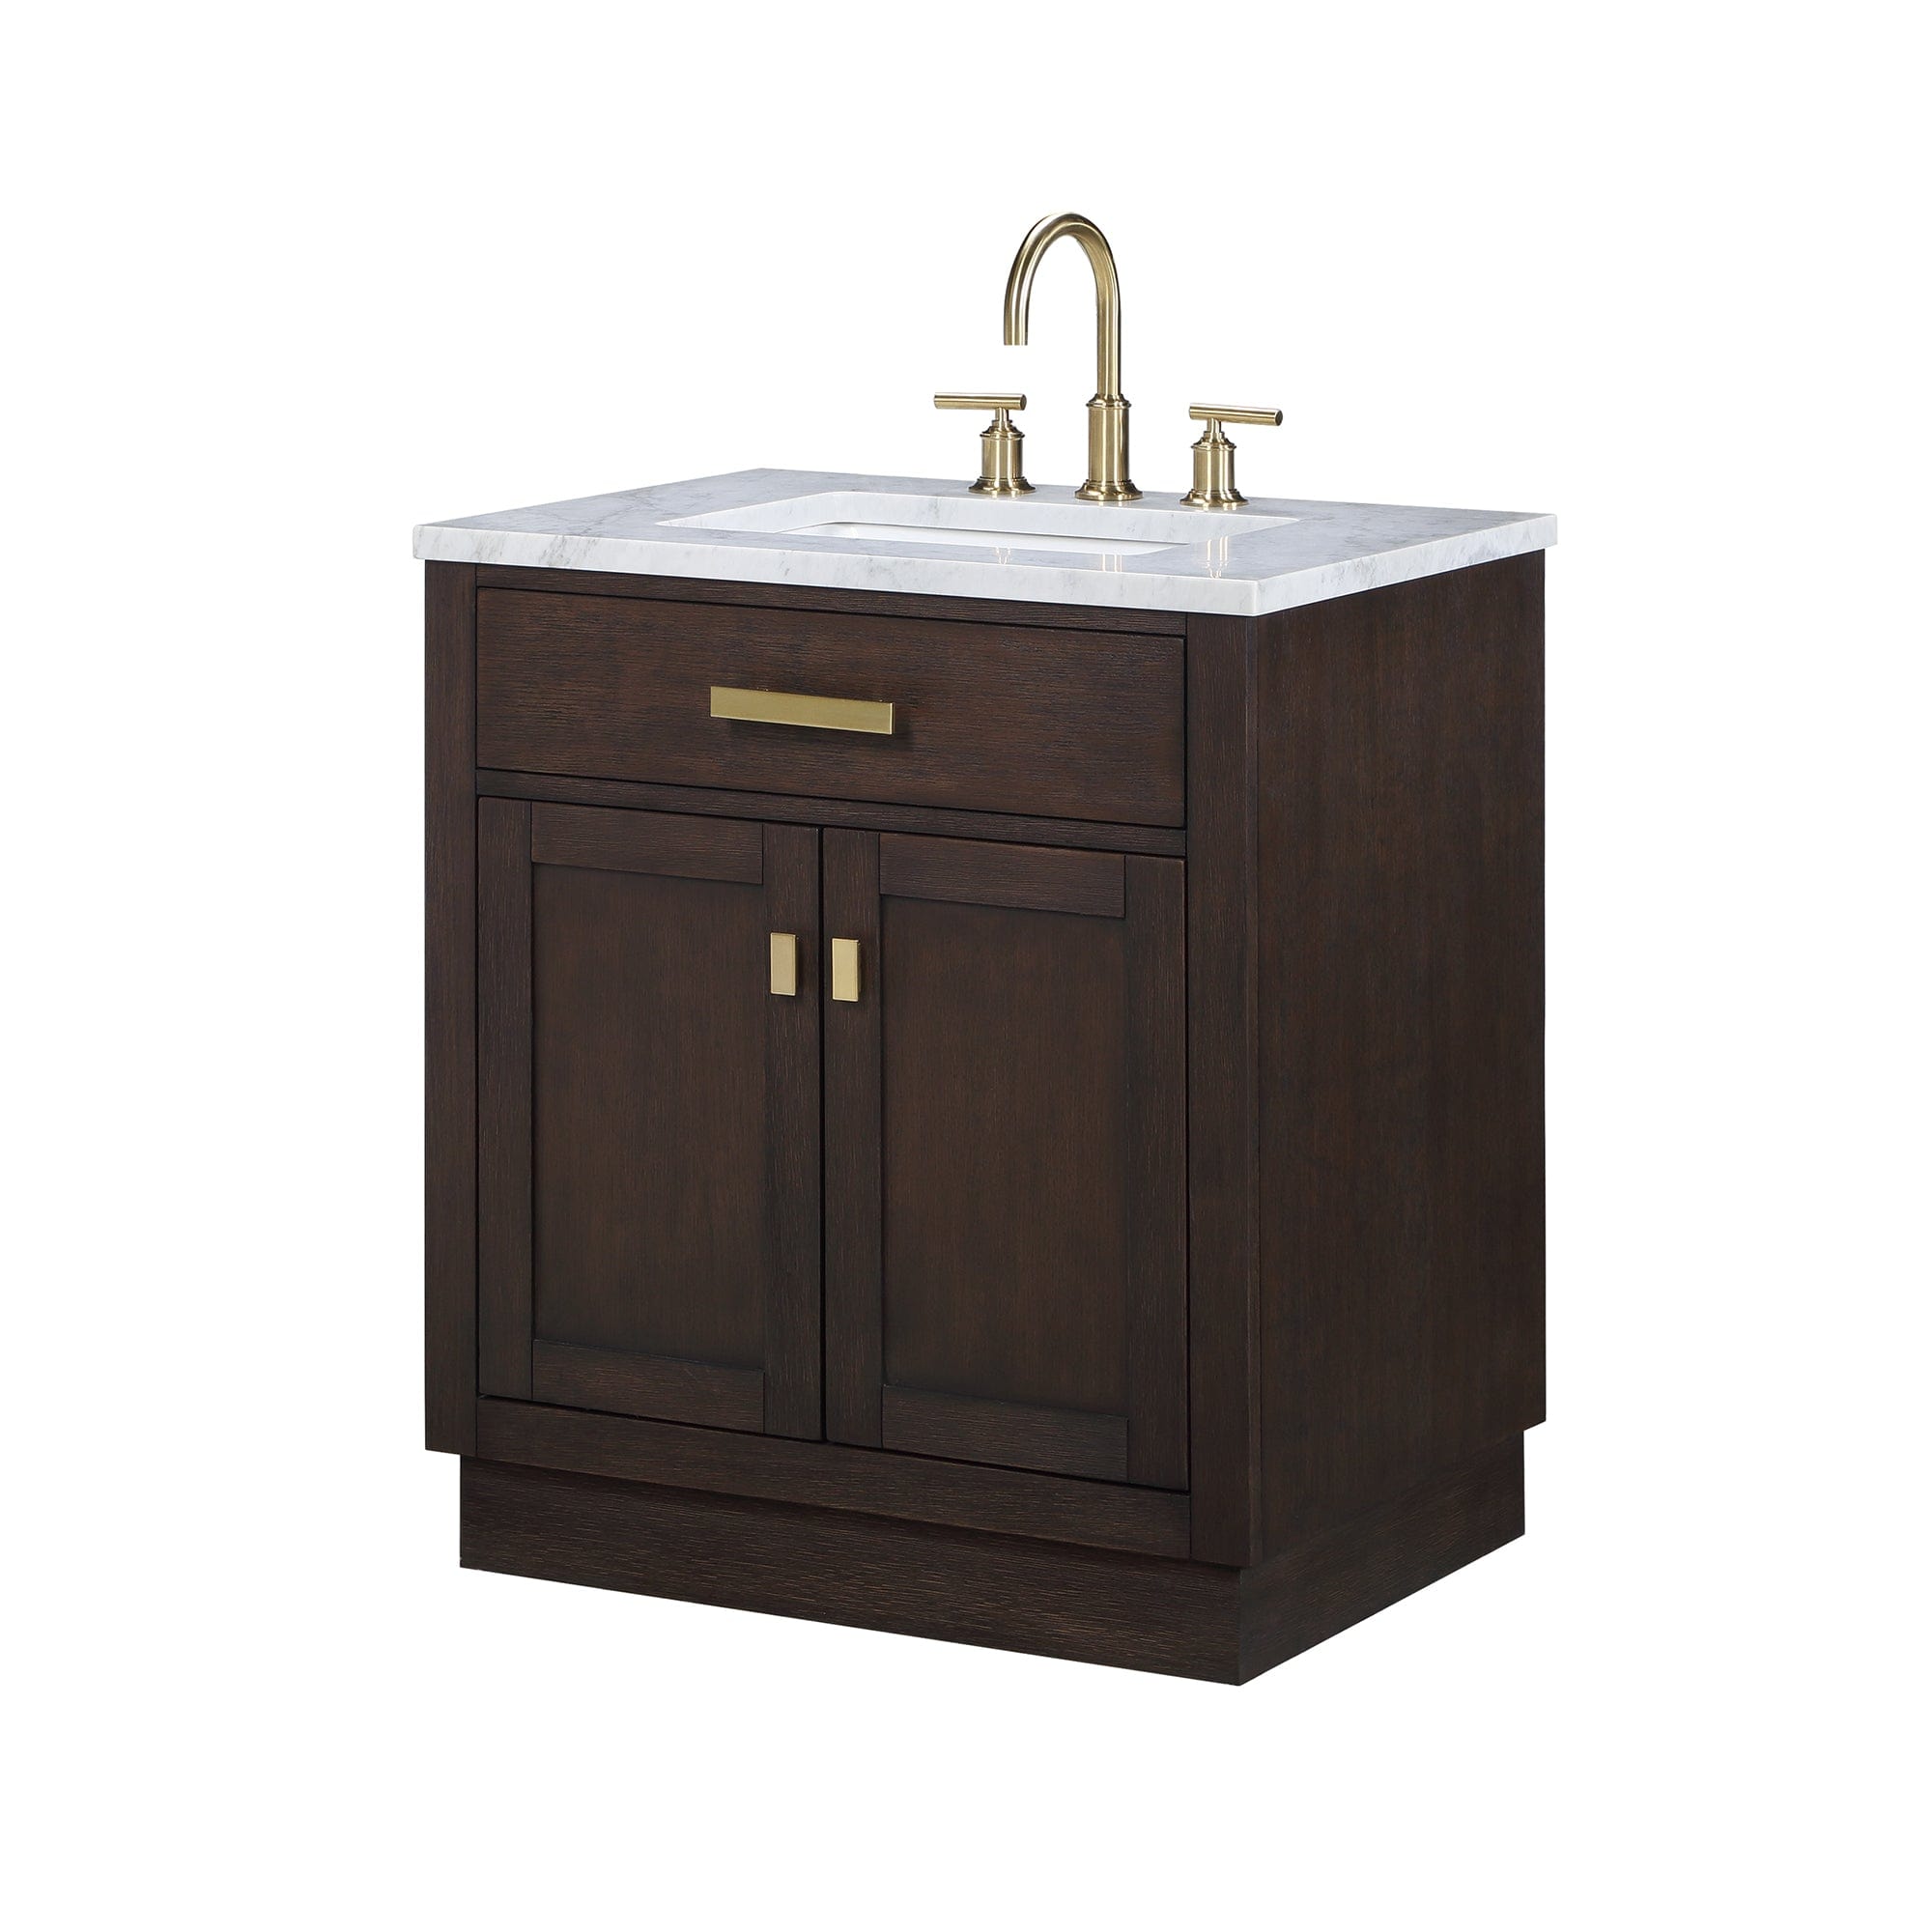 Chestnut 30 In. Single Sink Carrara White Marble Countertop Vanity In Brown Oak with Mirror - Molaix732030764644CH30CW06BK-R21000000